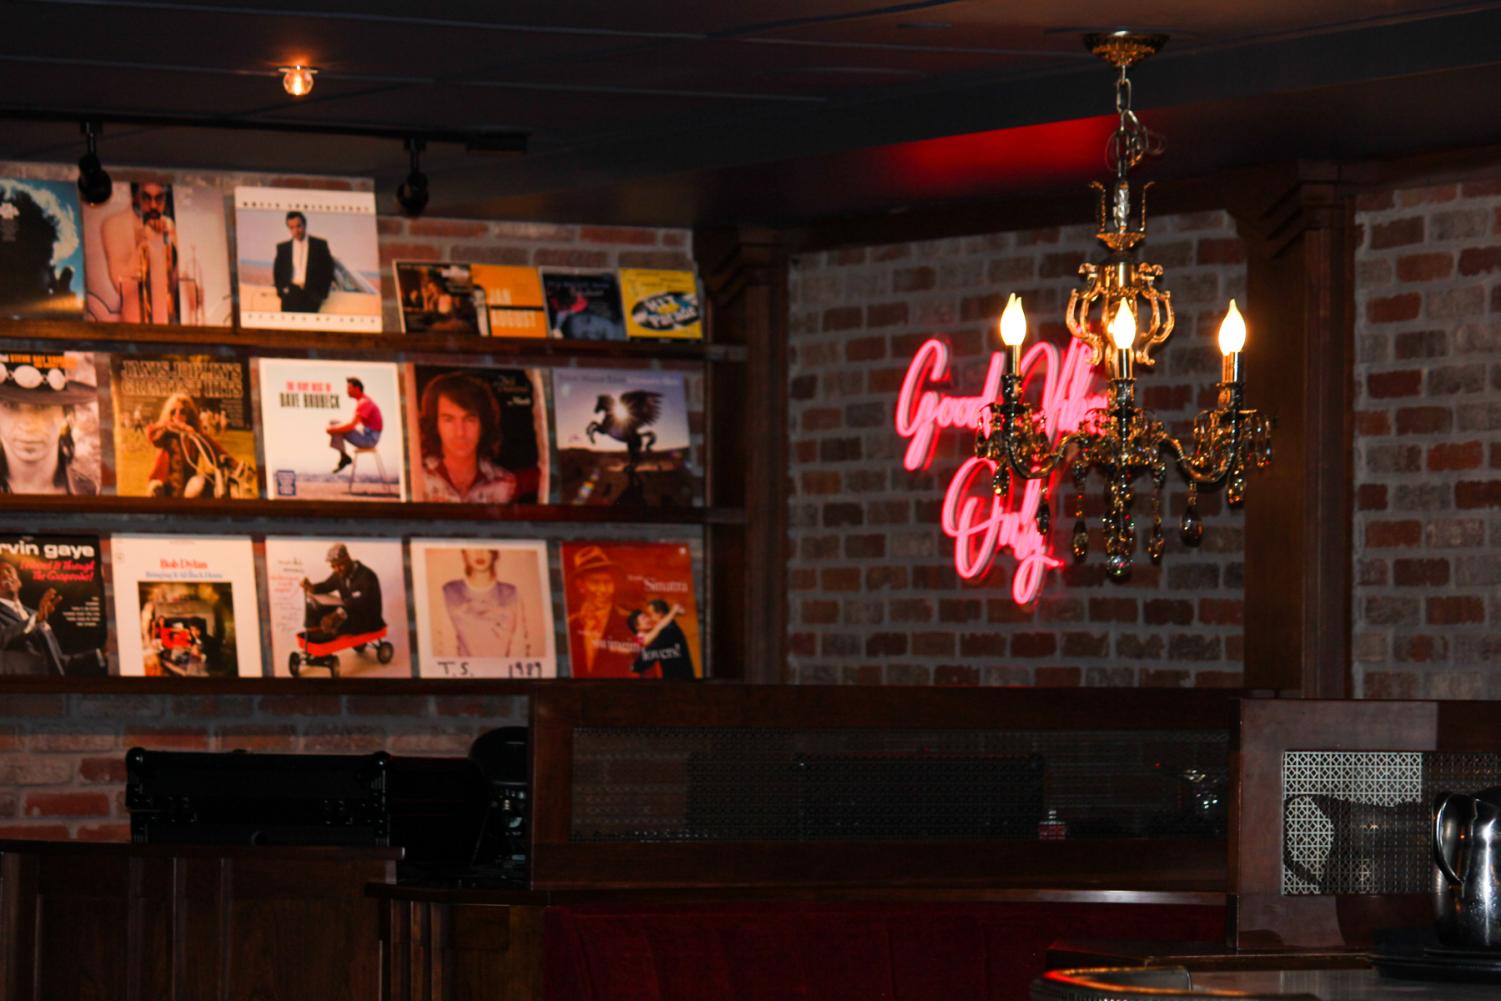 A wall of records decorates the Ace Gilletts bar along with a neon sign and chandeliers over the booths.